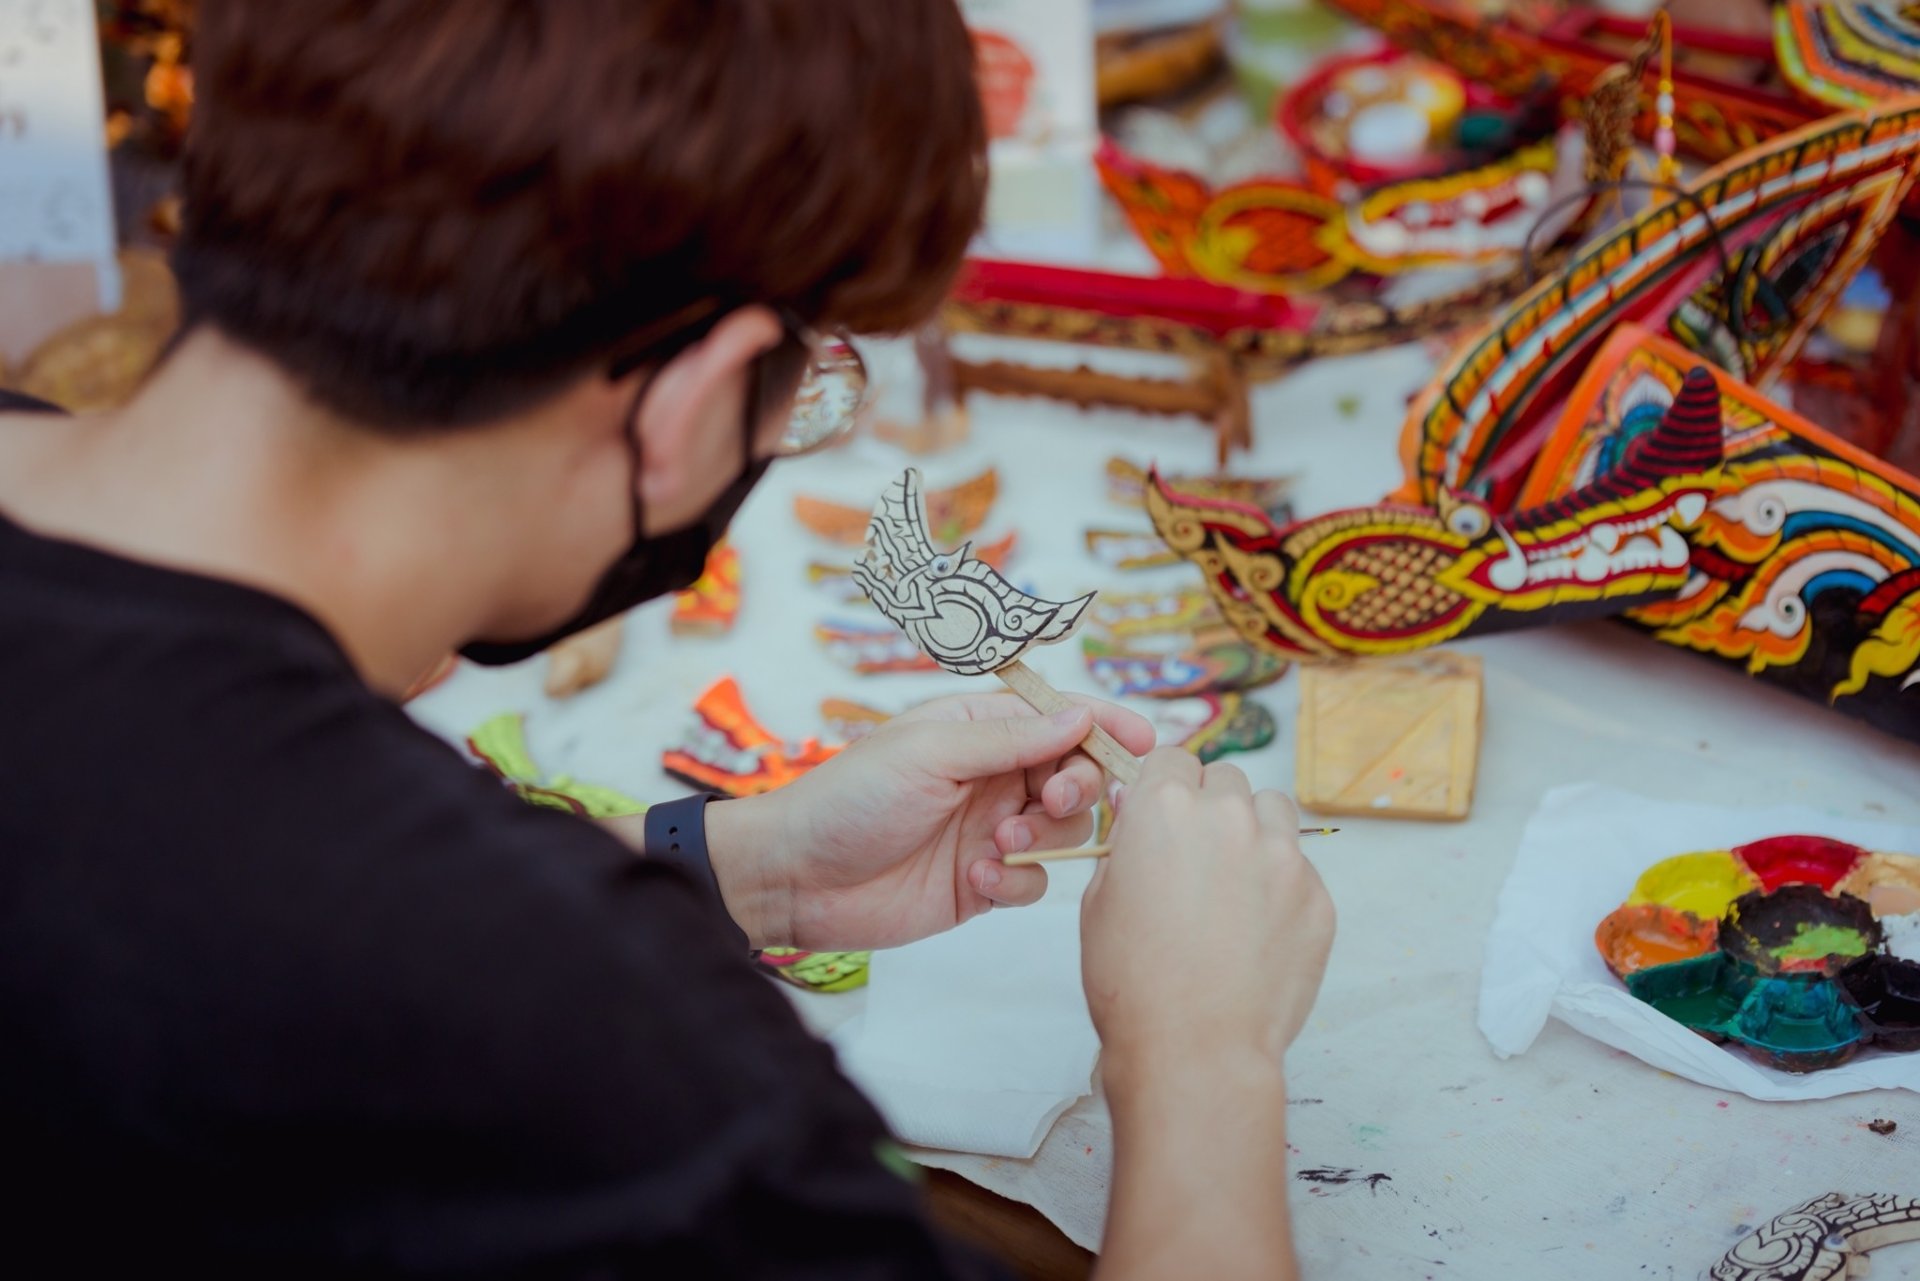 How to preservation and continuation of traditional crafts and folk art